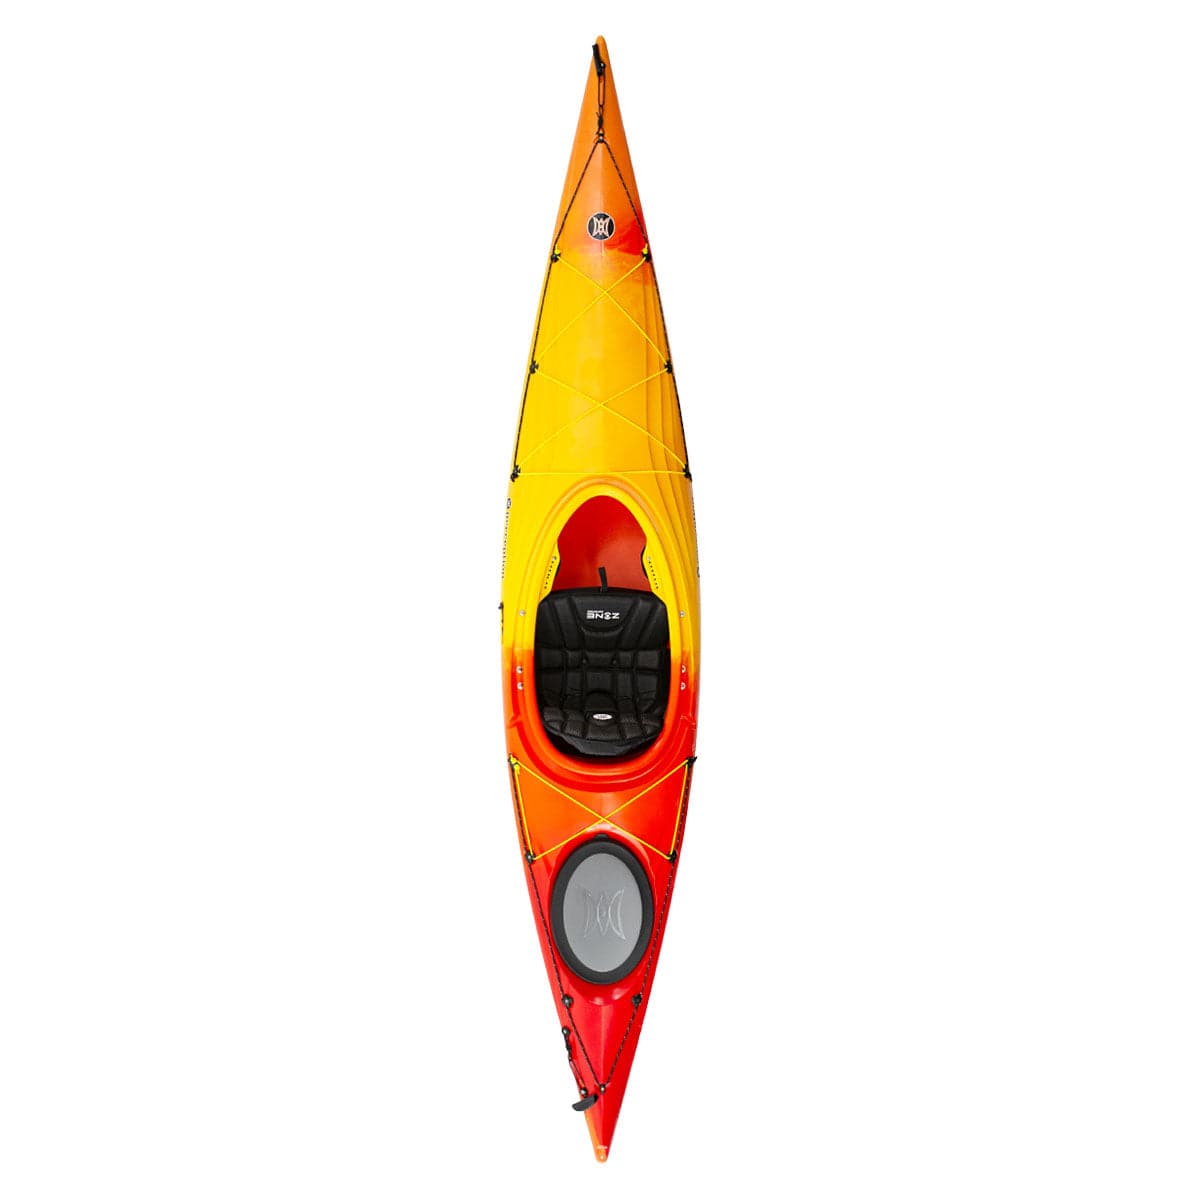 Featuring the Expression 11.5 expedition touring / sea kayak, sit-inside rec / touring kayak manufactured by Perception shown here from one angle.